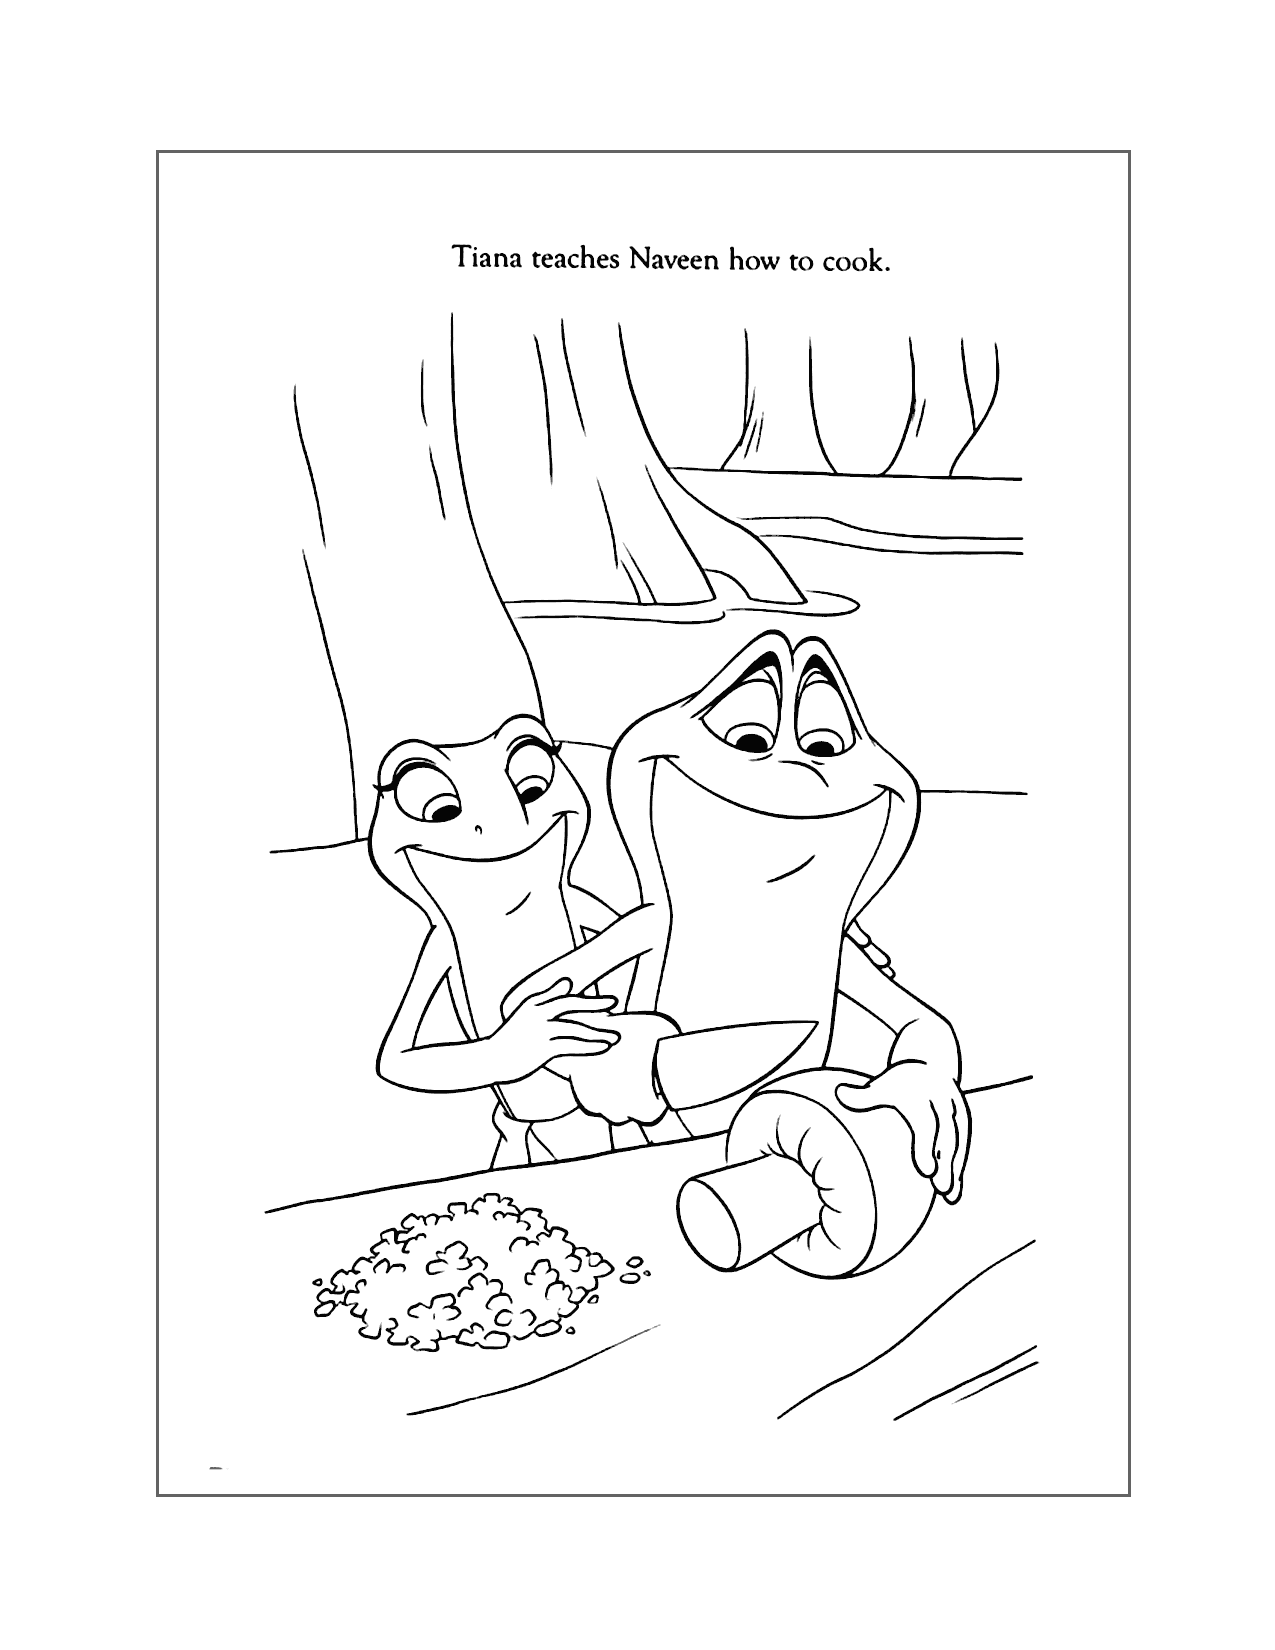 Tiana Teaches Naveen To Cook Coloring Page